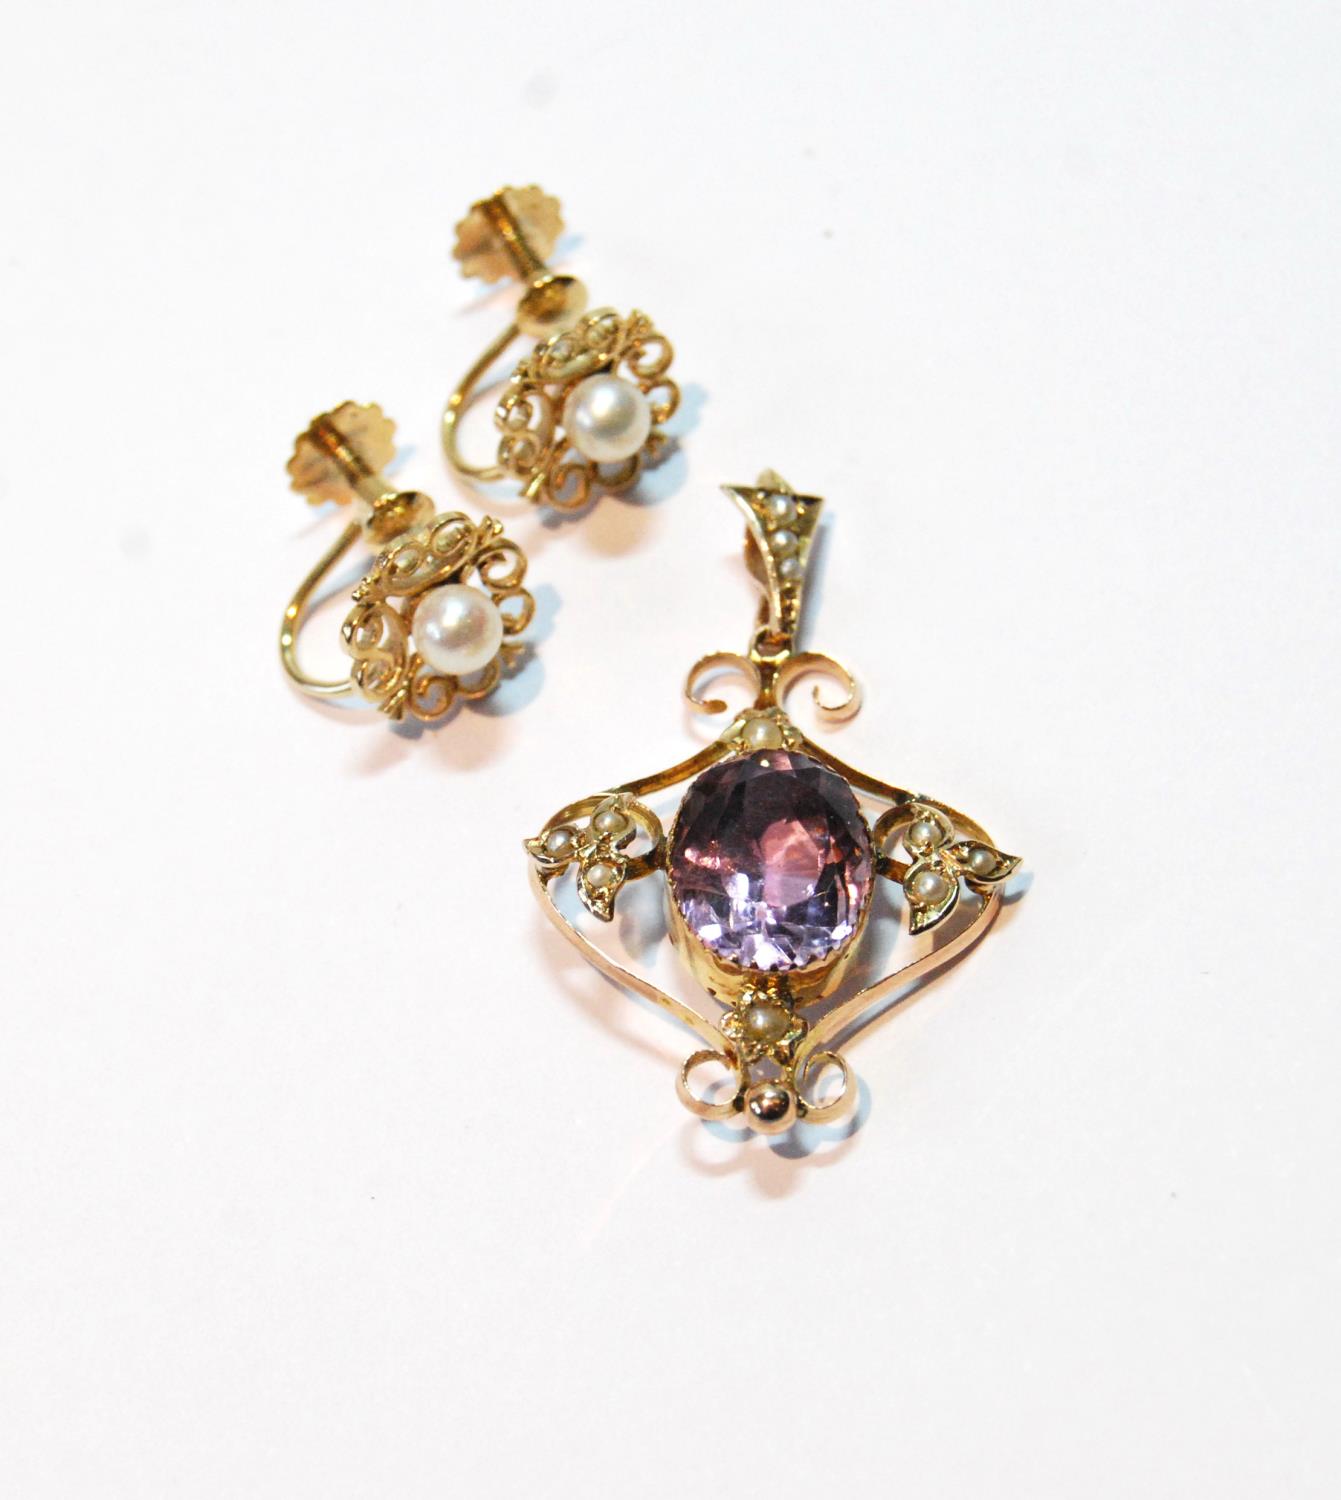 Edwardian gold openwork pendant with amethysts and pearls, and a pair of pearl earrings.